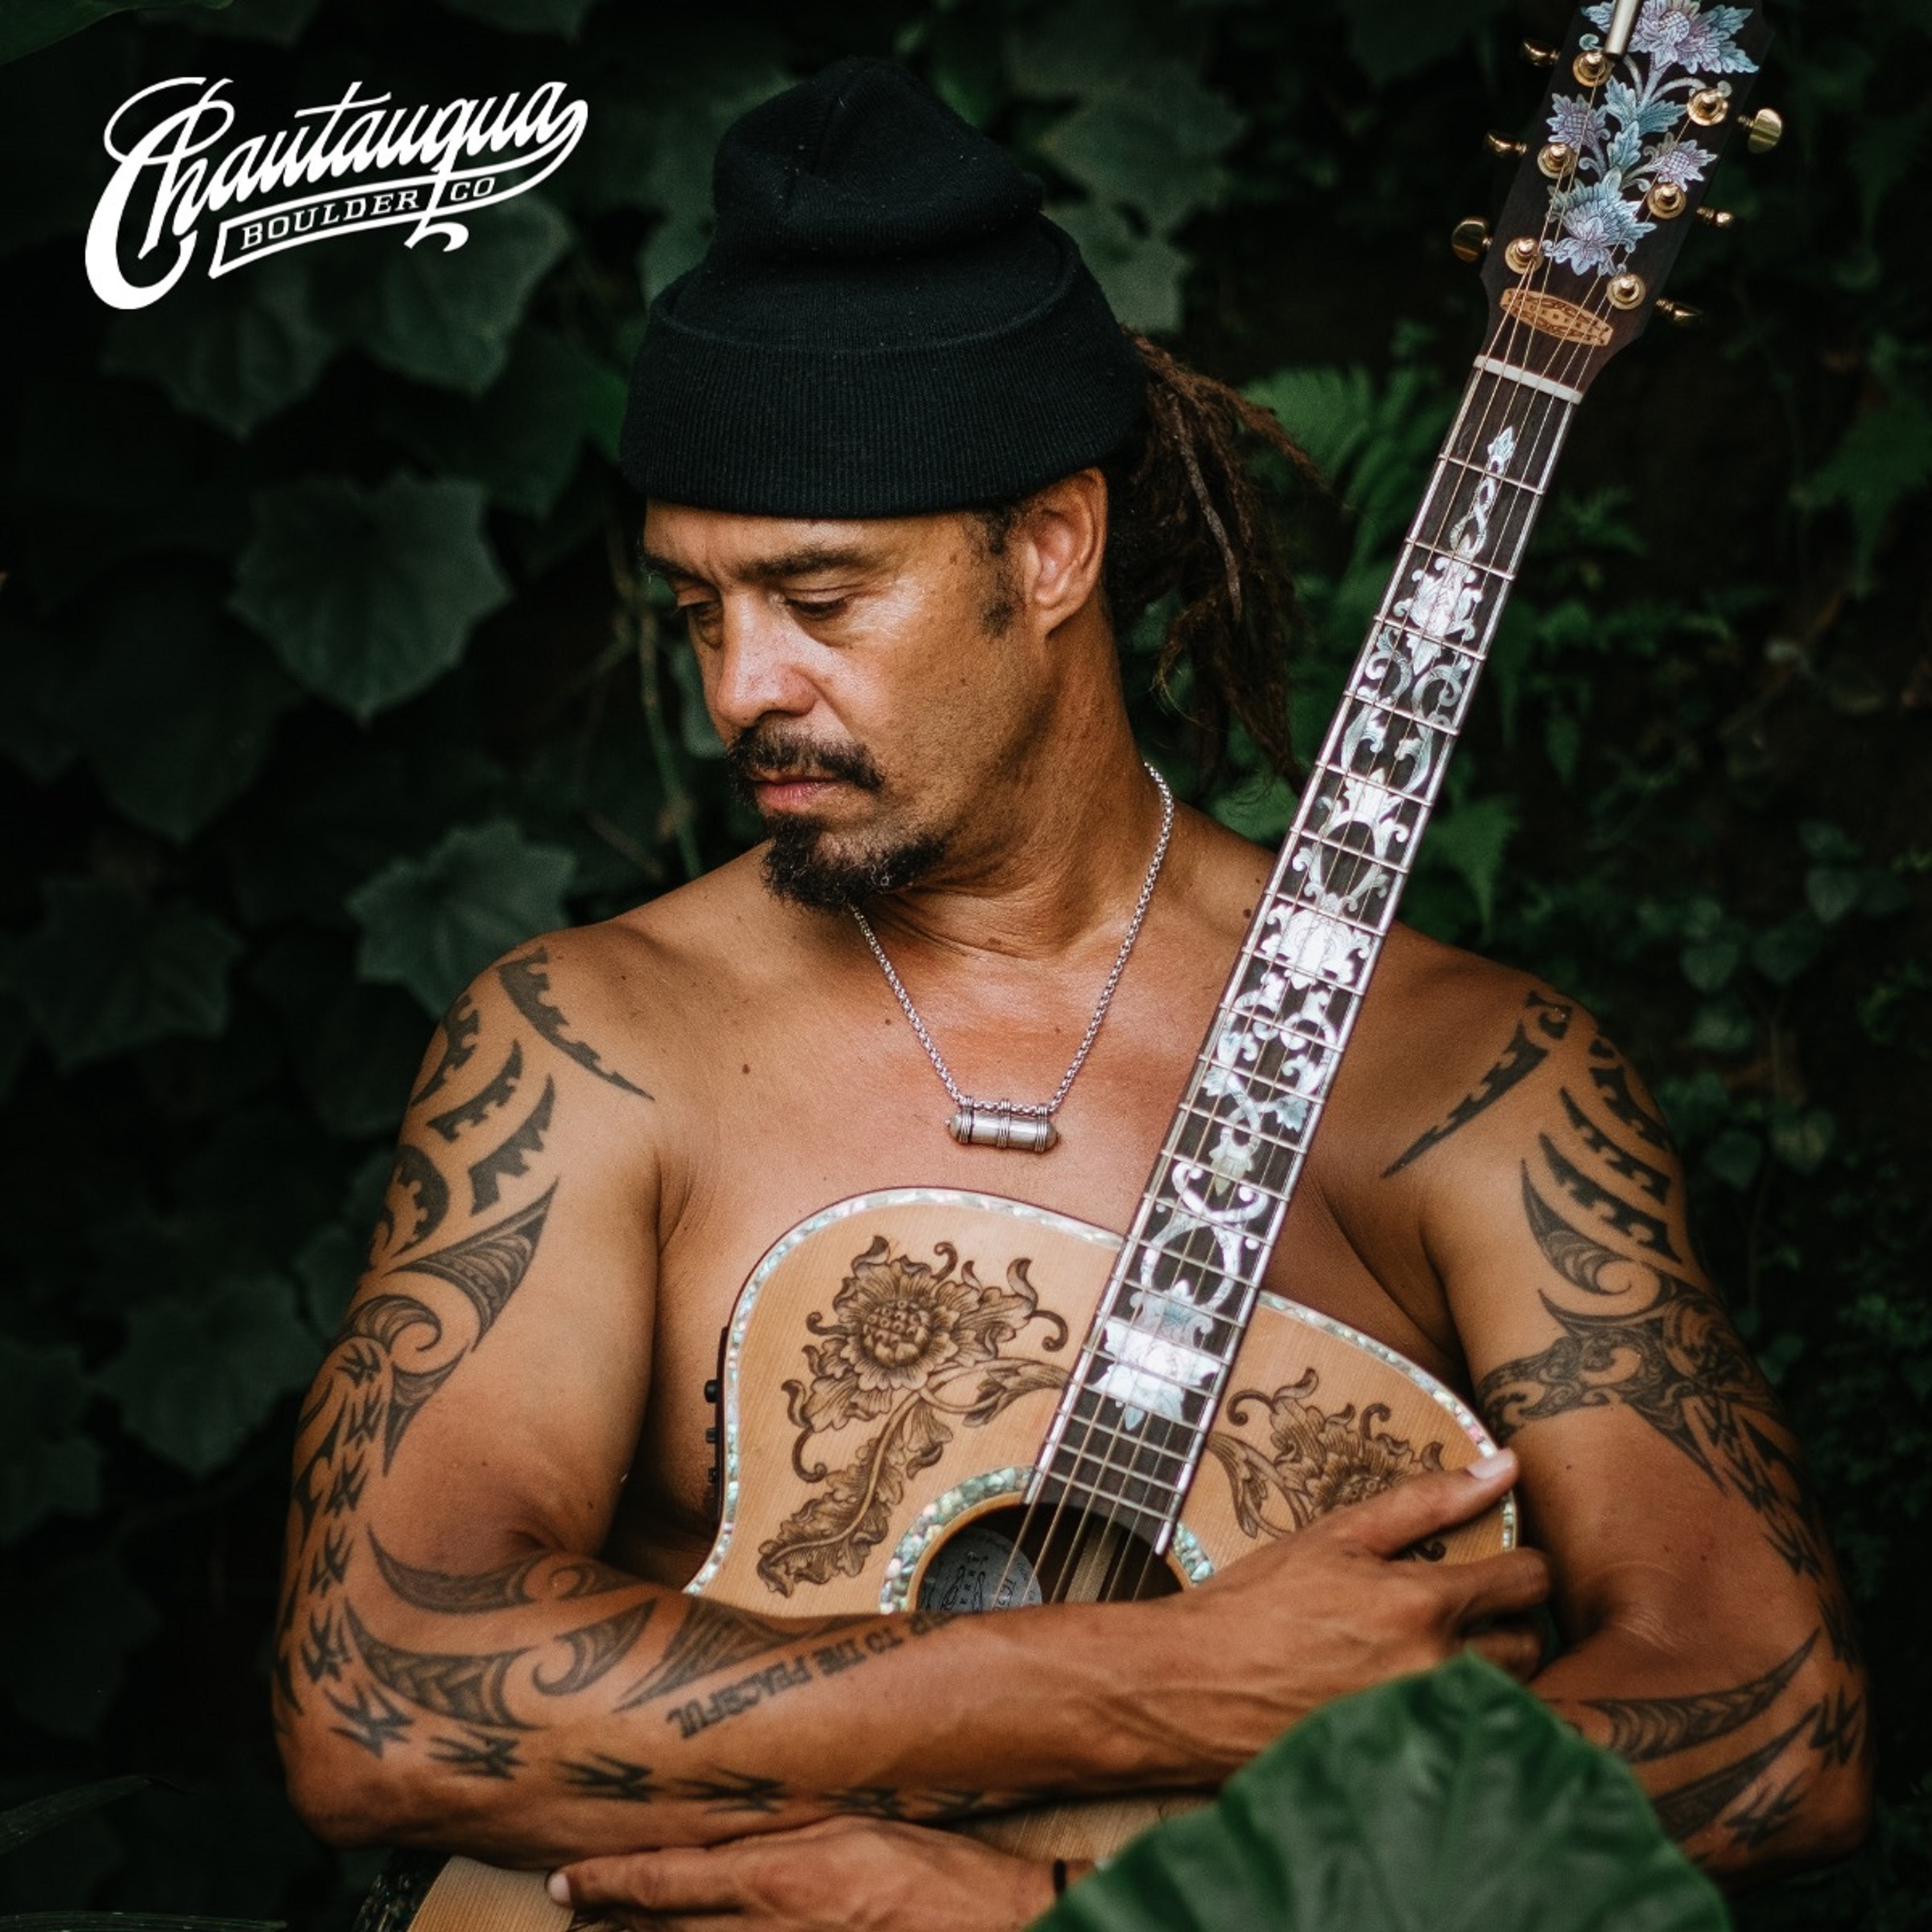 Z2 Entertainment & 97.3 KBCO Proudly Present An Acoustic Evening with Michael Franti & Spearhead